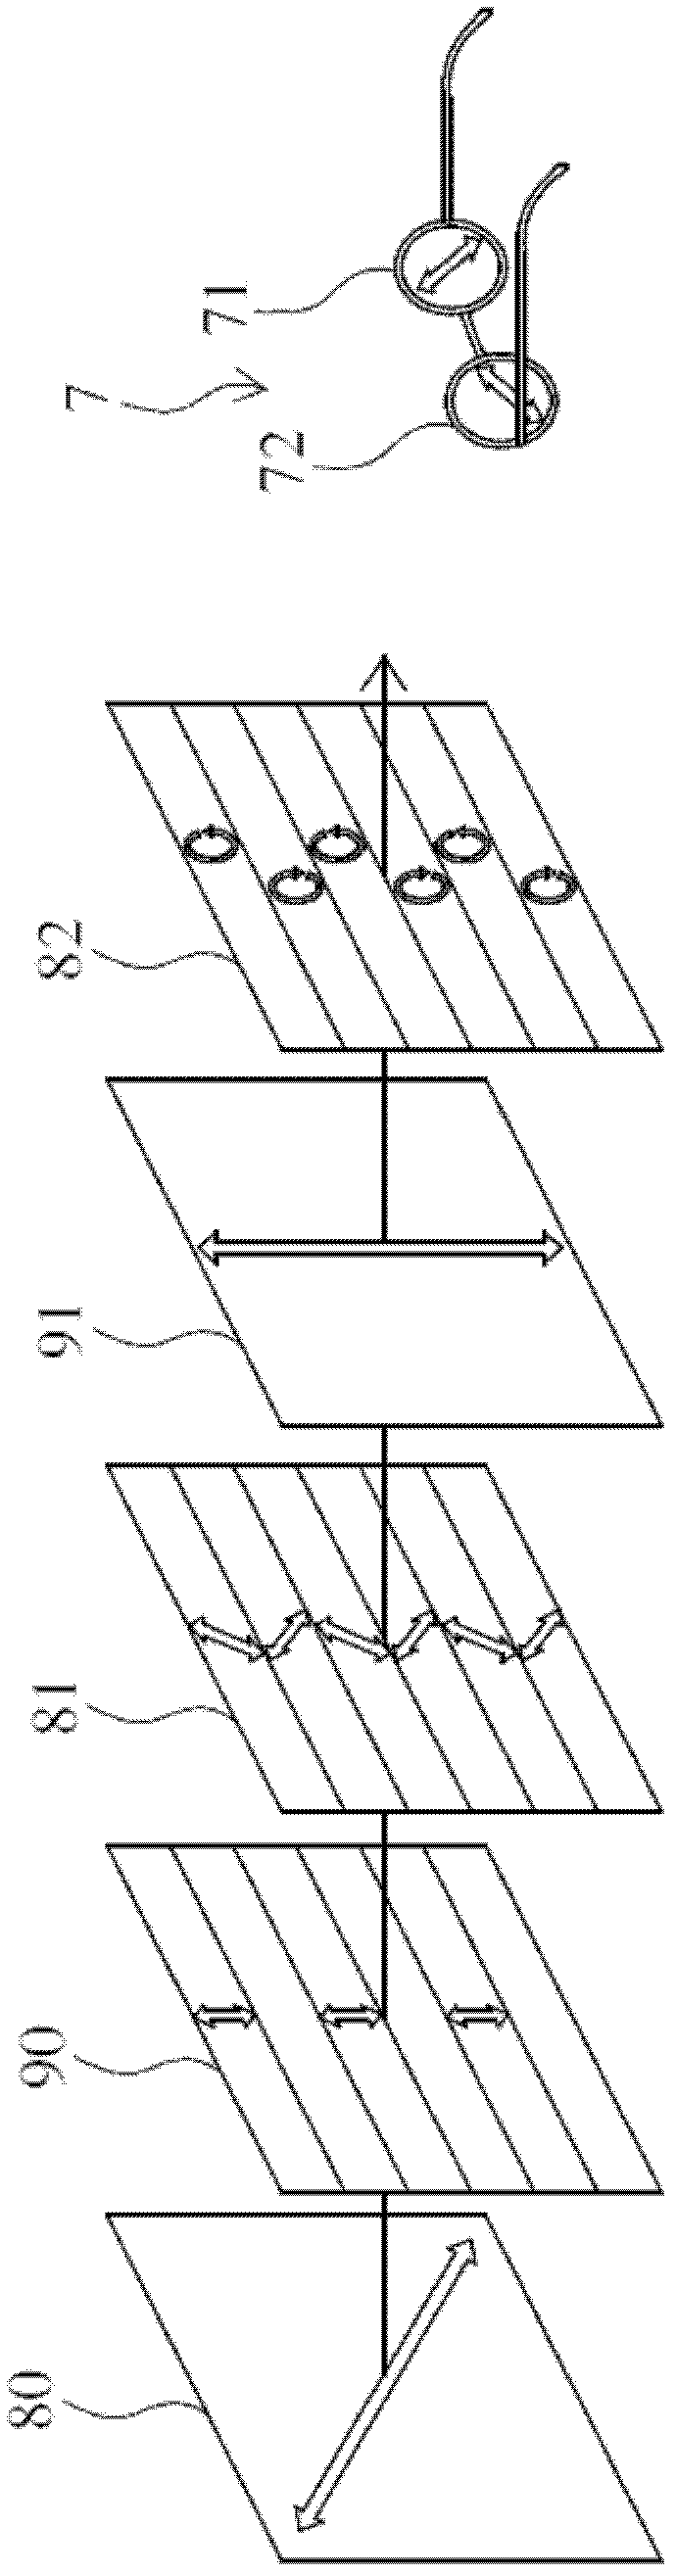 3D (three dimensional) display device and phase delay piece thereof